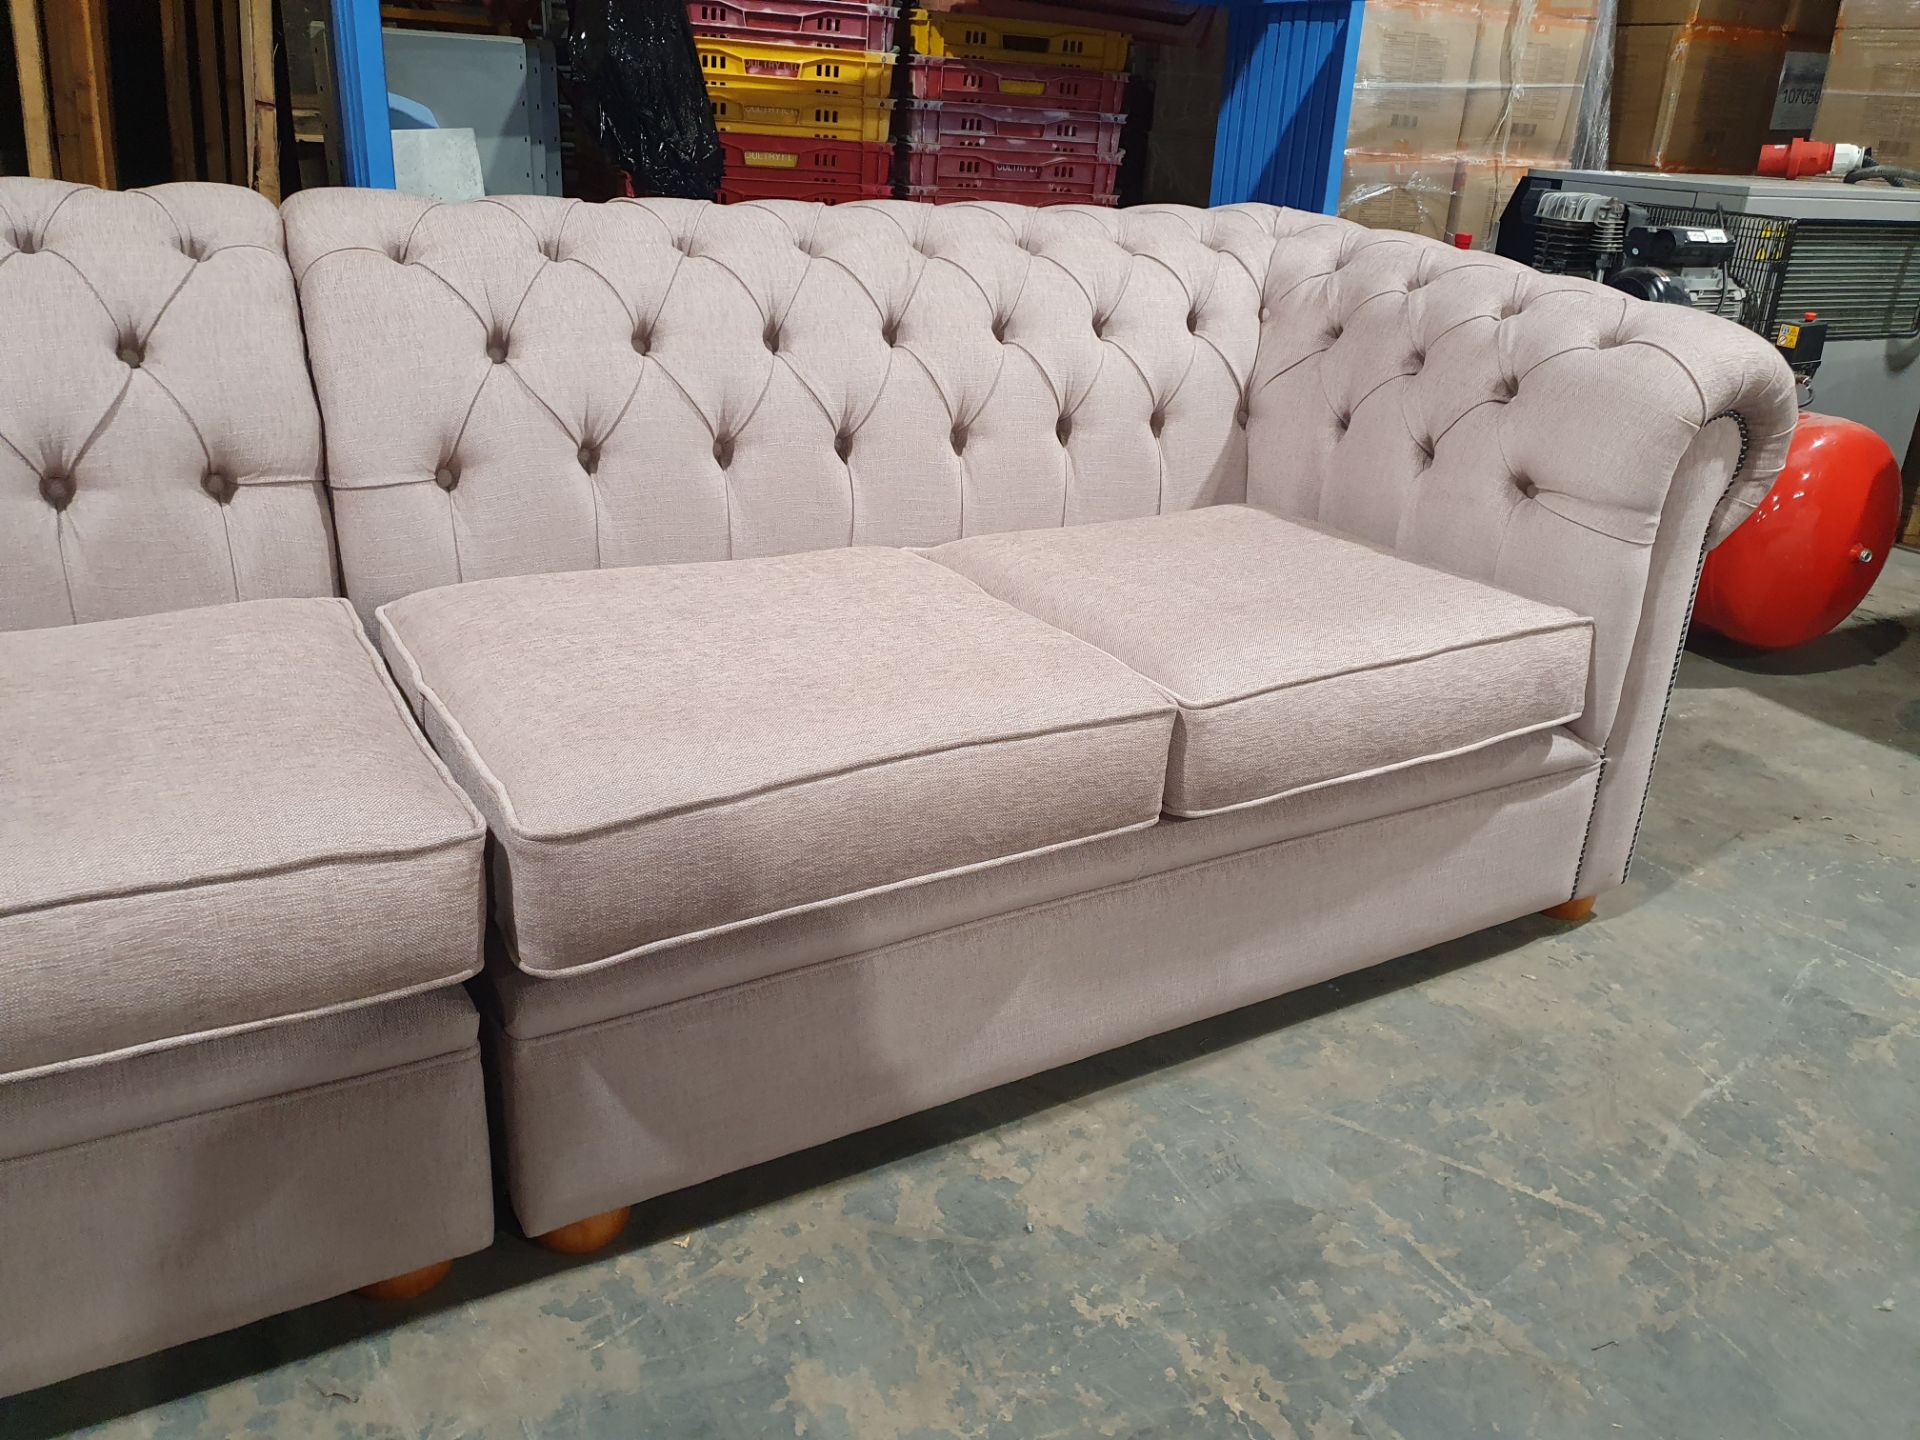 Bespoke Chesterfield 2 Unit Sofa - Image 4 of 9